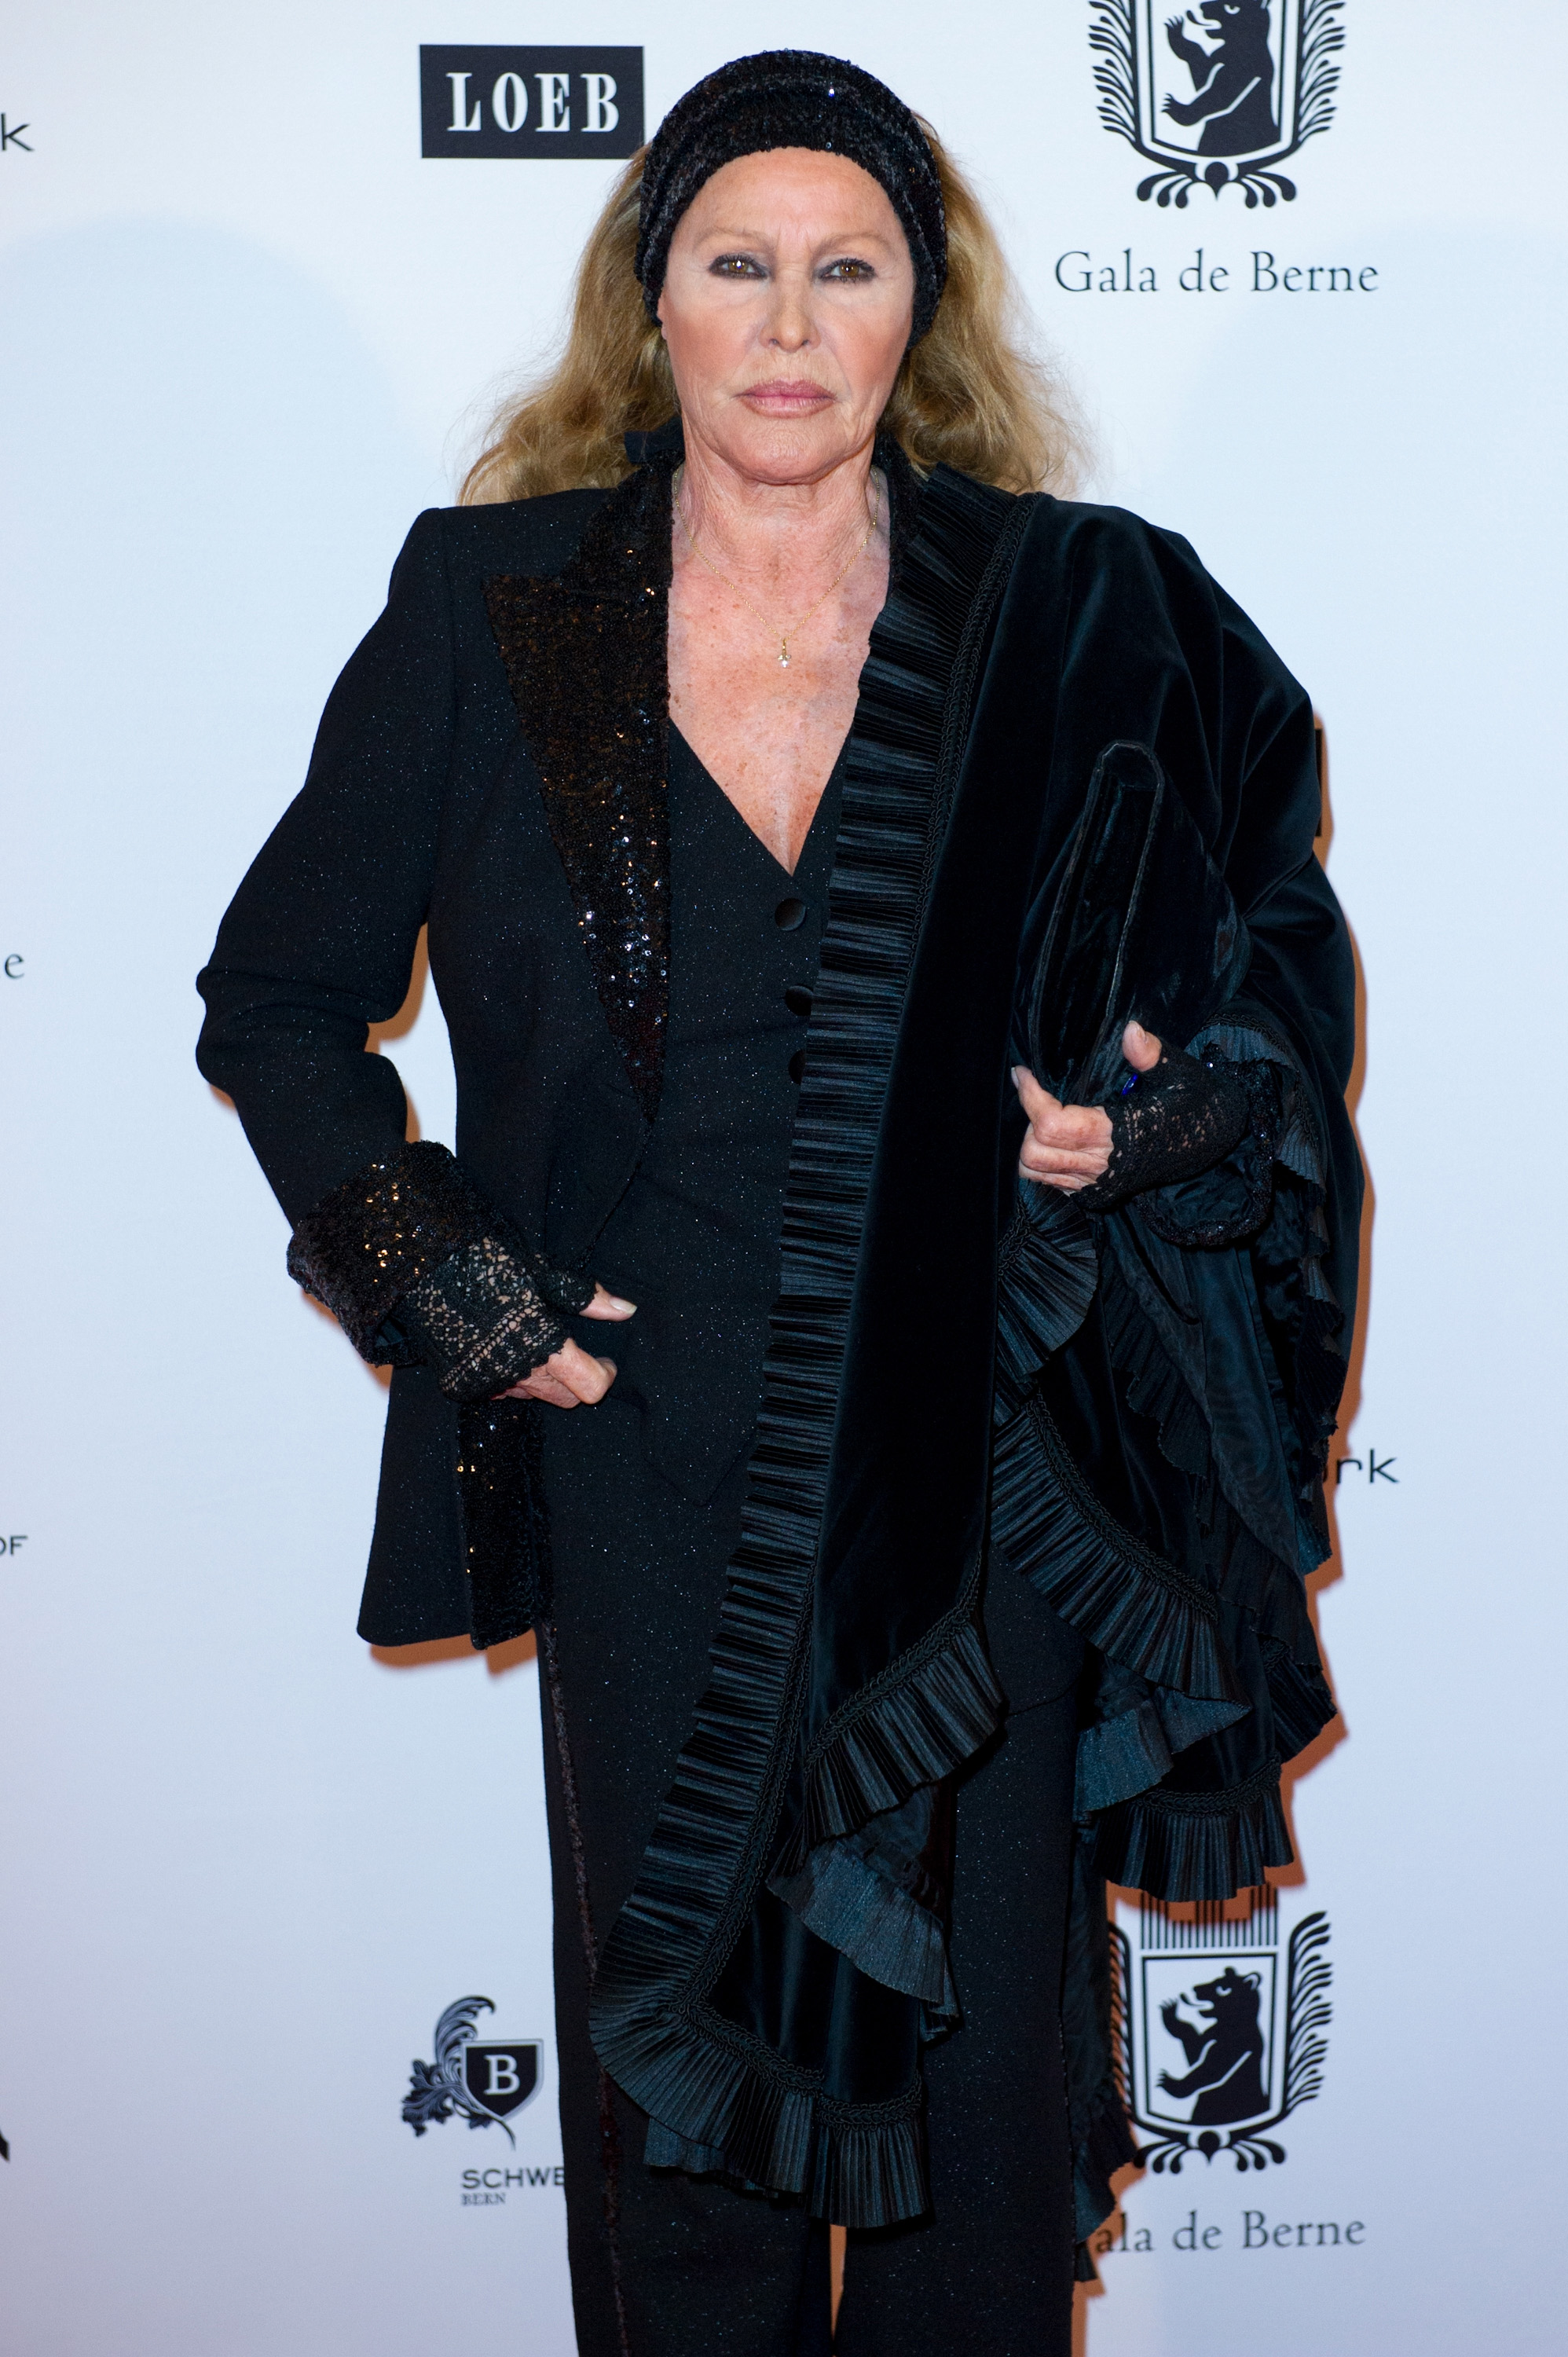 Ursula Andress attends the Gala of Bern in her honour celebrating 50 years of the James Bond films held in Bern, Switzerland, on November 3, 2012. | Source: Getty Images